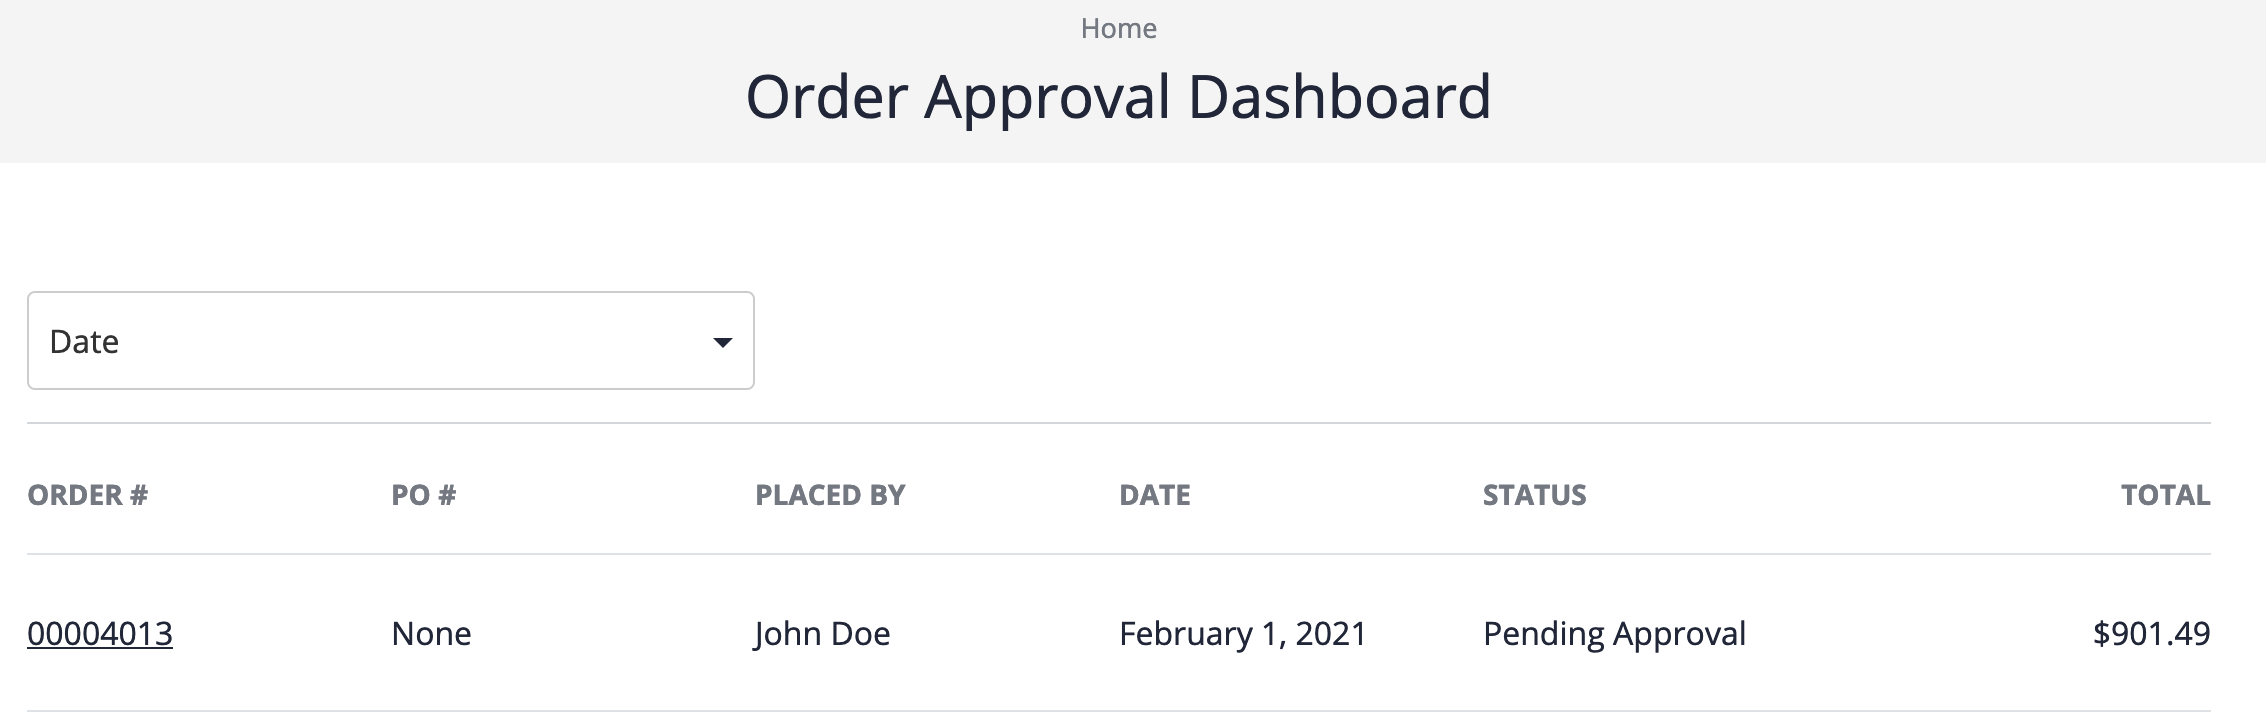 Approval Dashboard